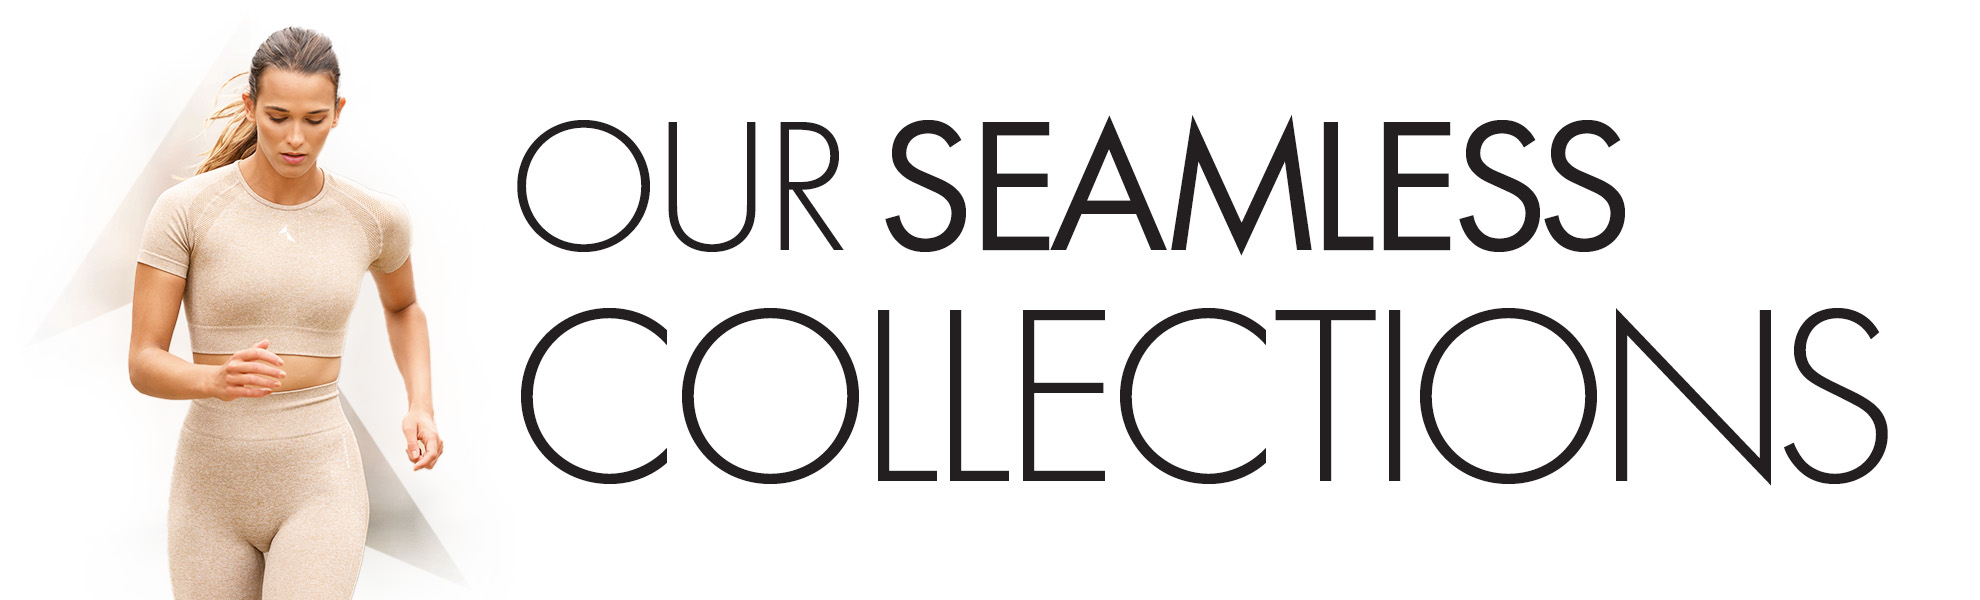 Seamless collections head